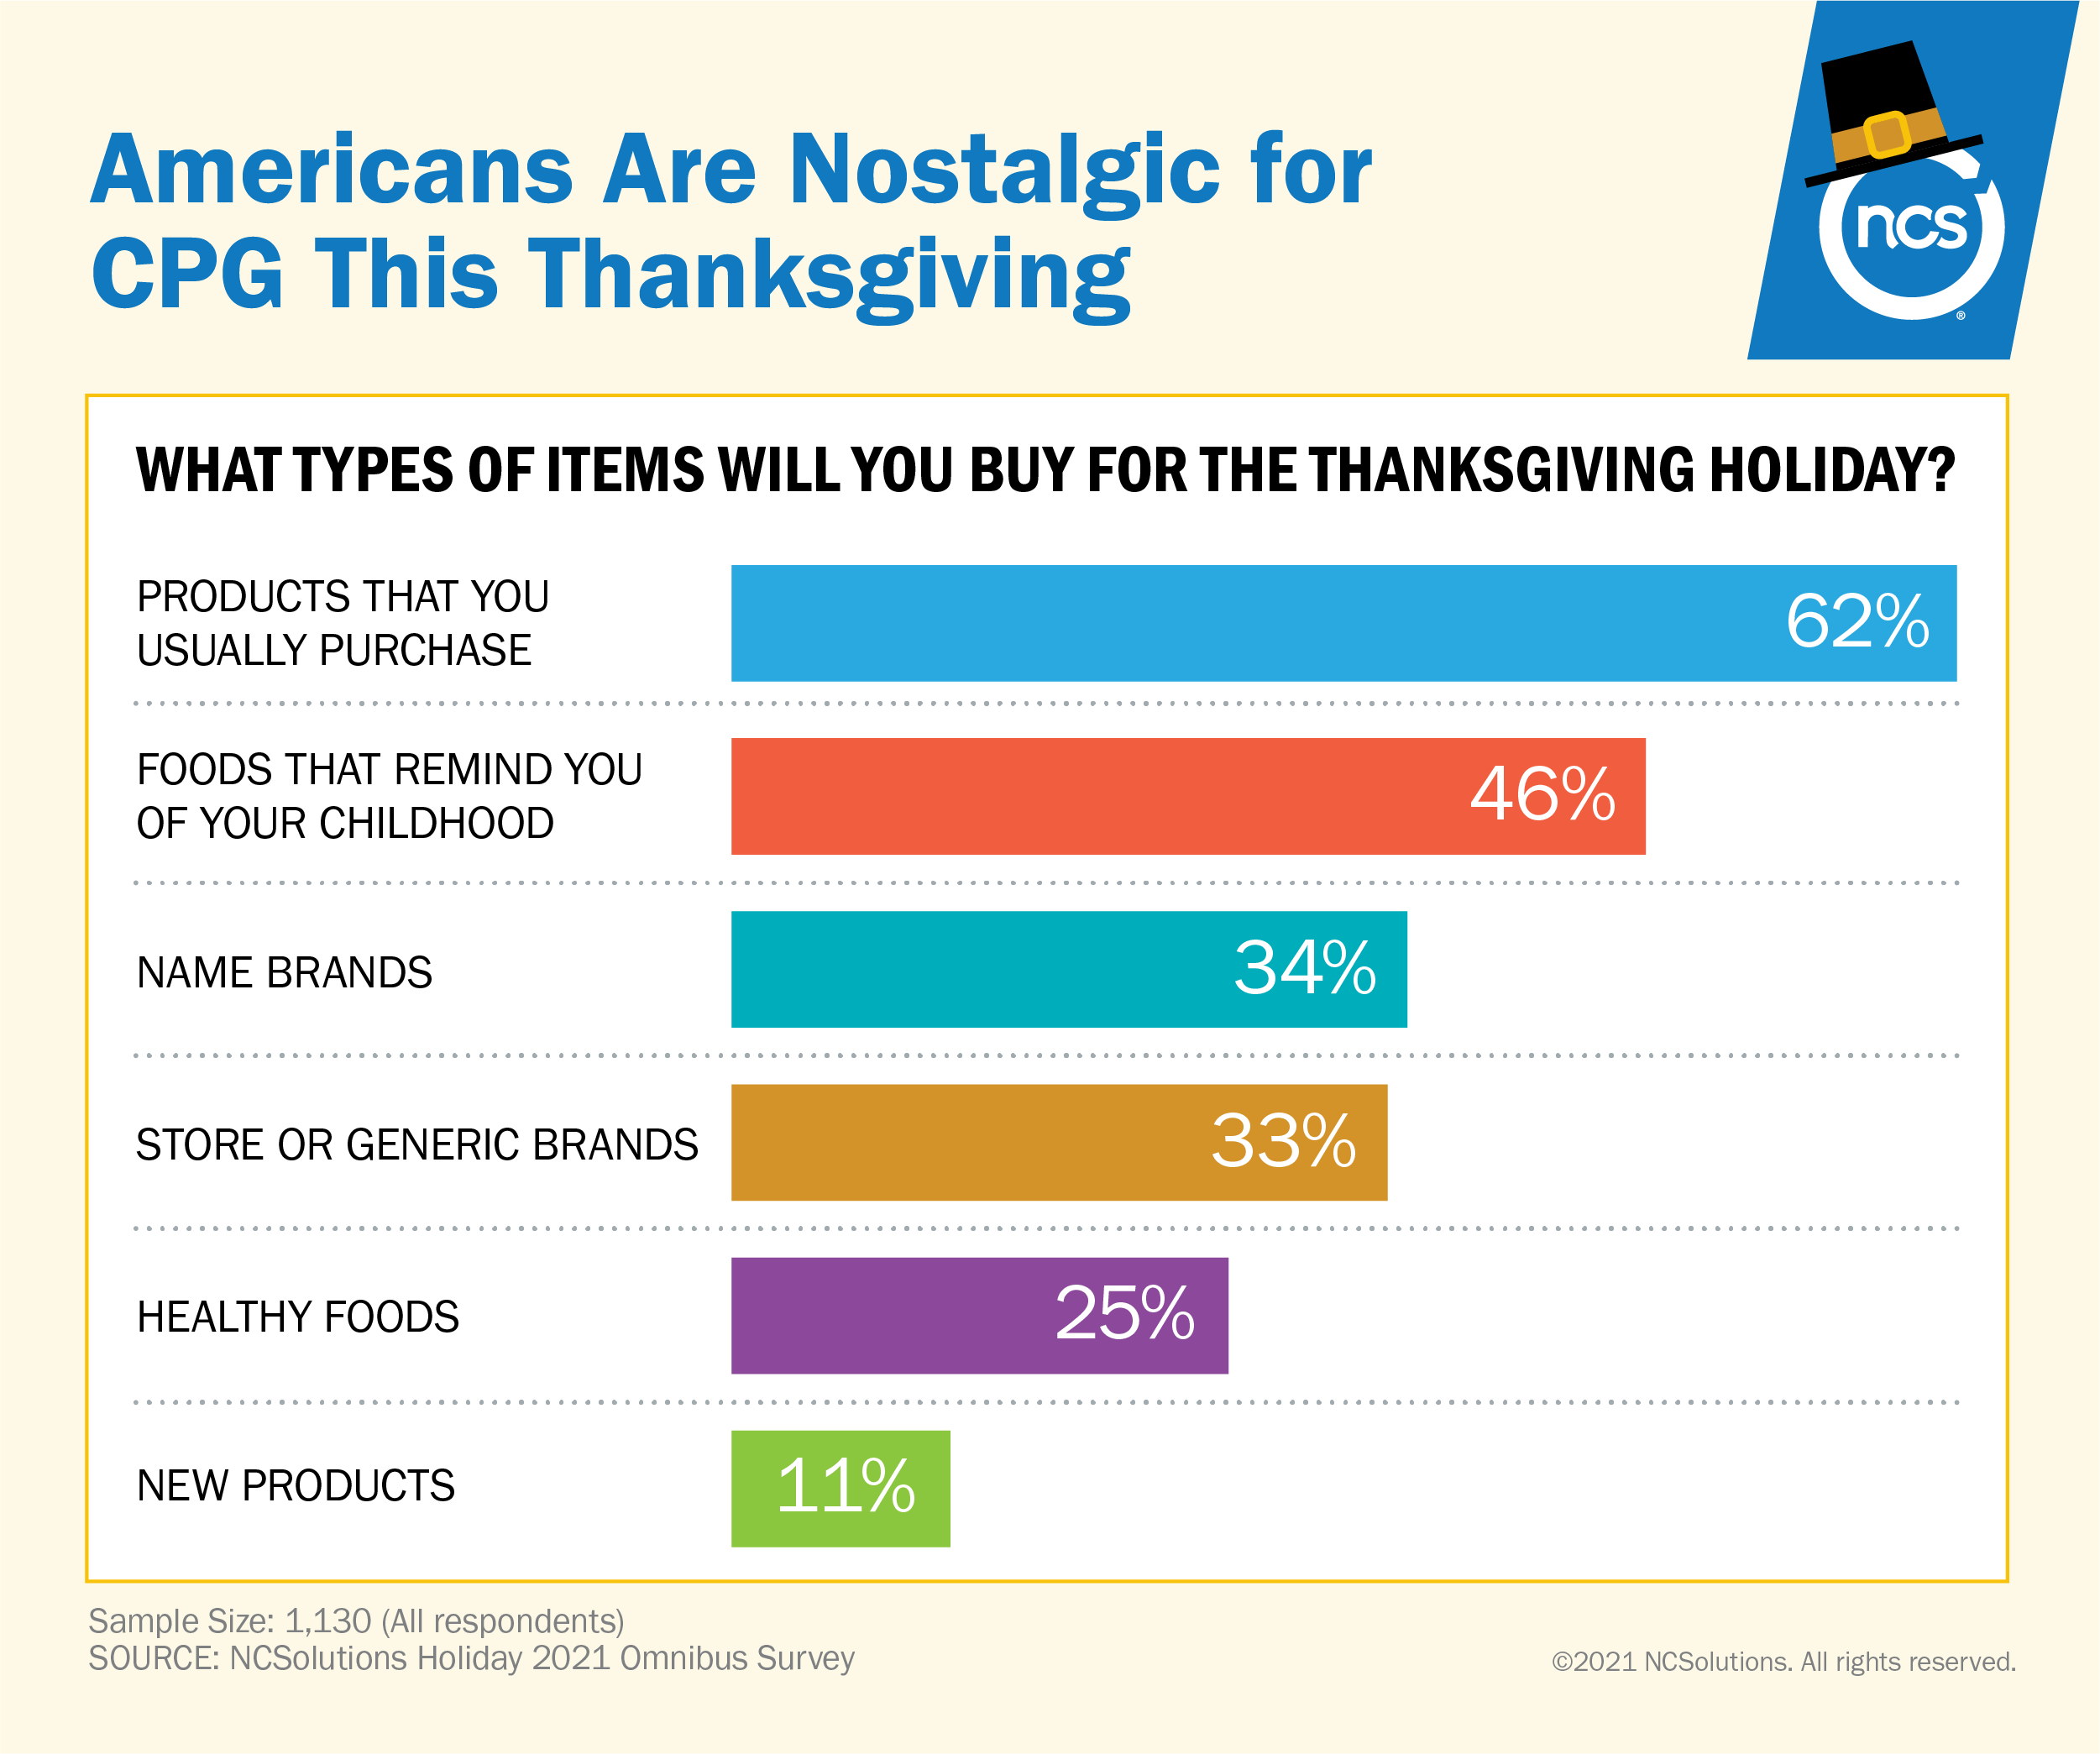 Americans plan to buy CPG products they usually purchase and nostalgic foods for Thanksgiving 2021